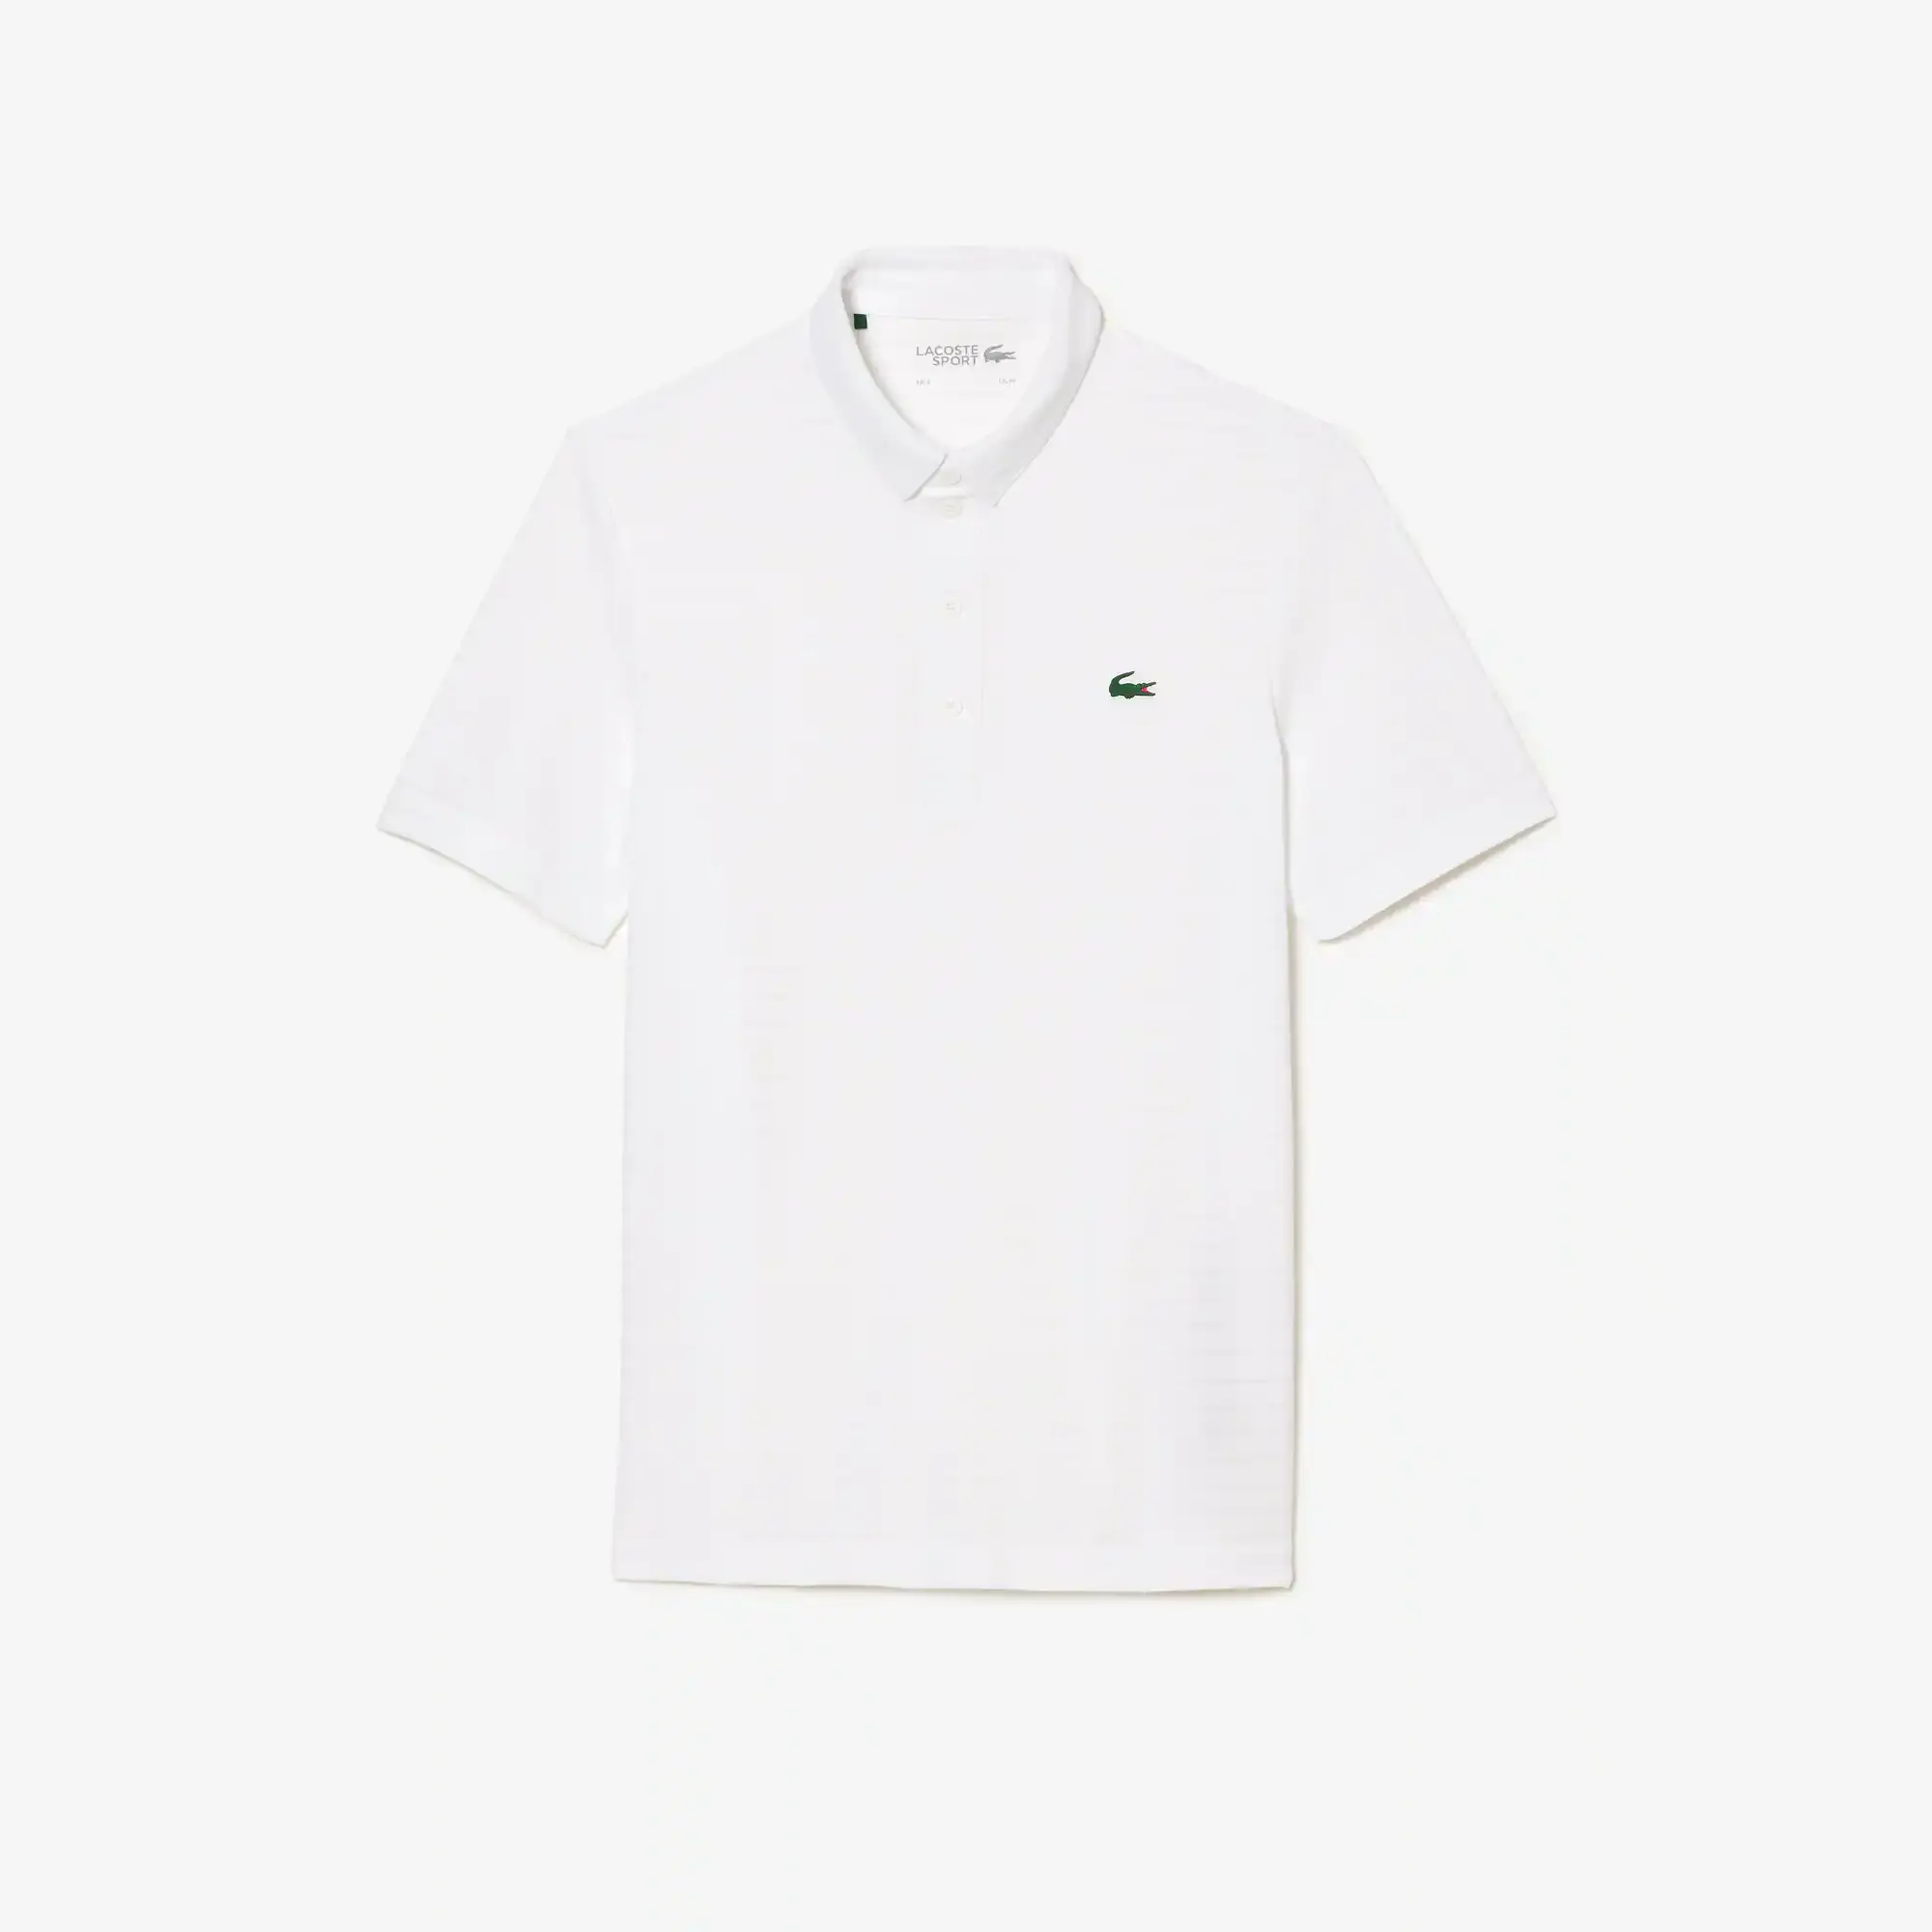 Lacoste Men's SPORT Textured Breathable Golf Polo. 2